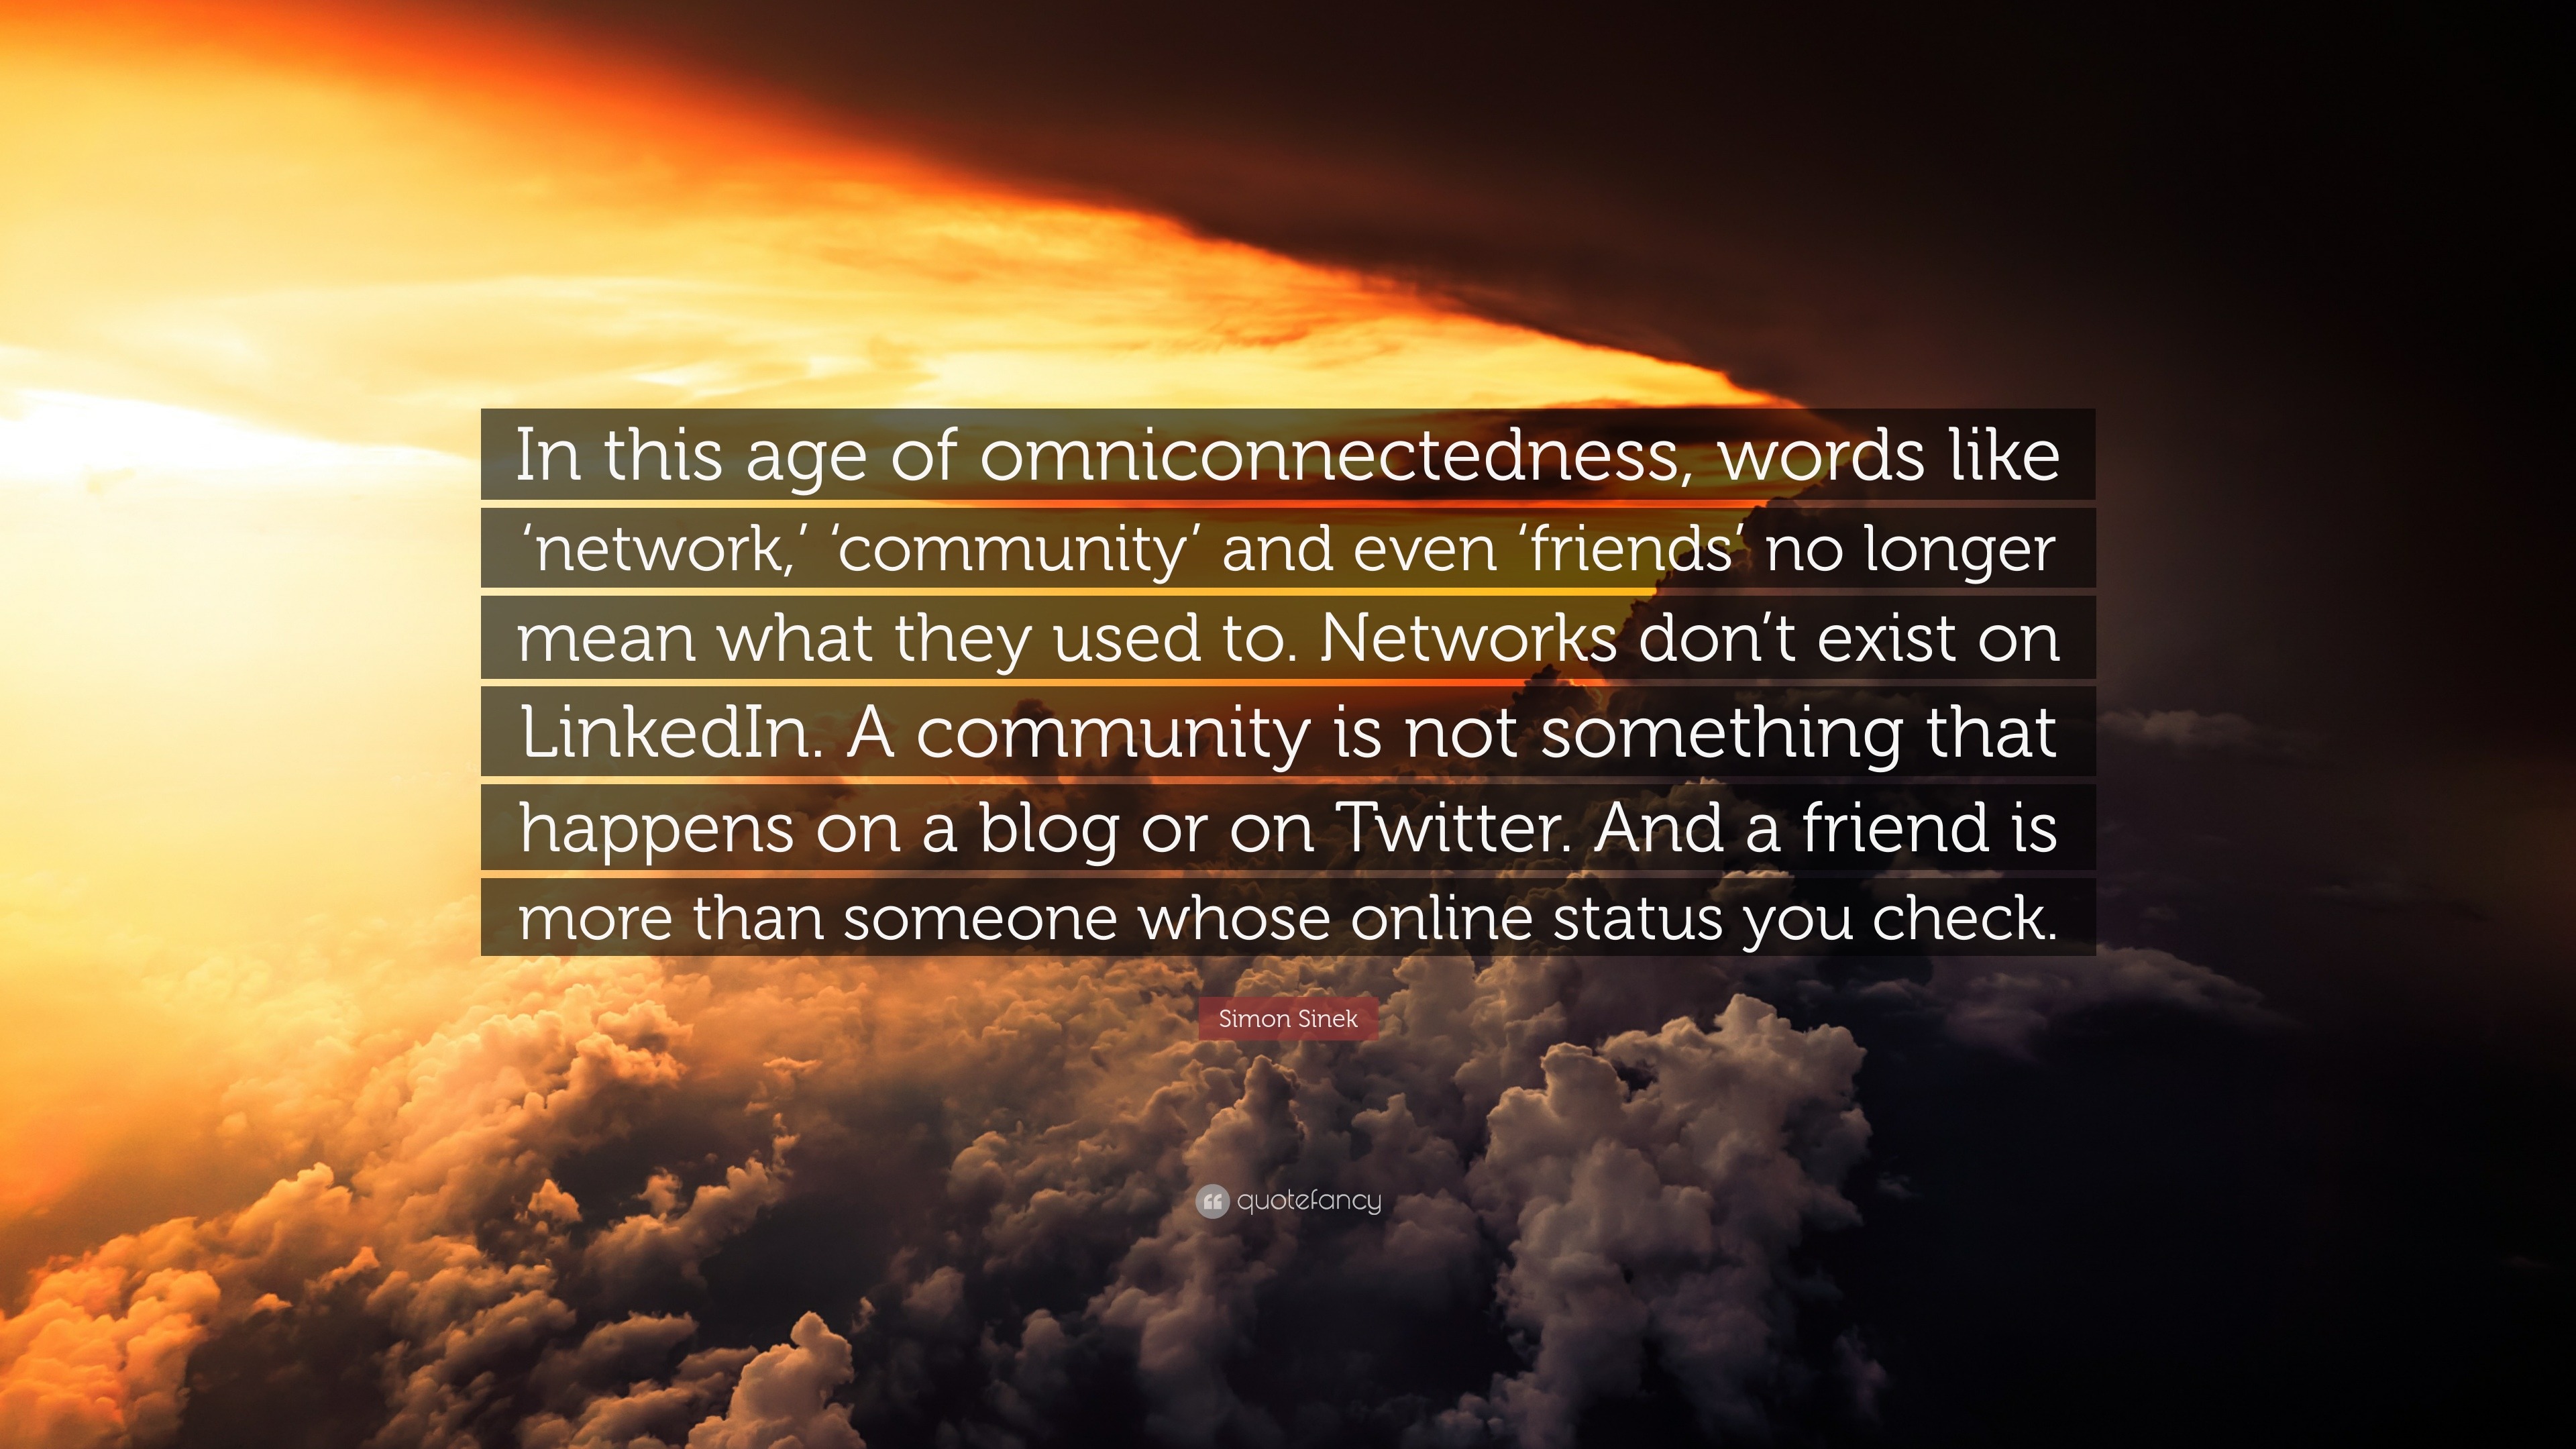 Simon Sinek Quote: “In this age of omniconnectedness, words like